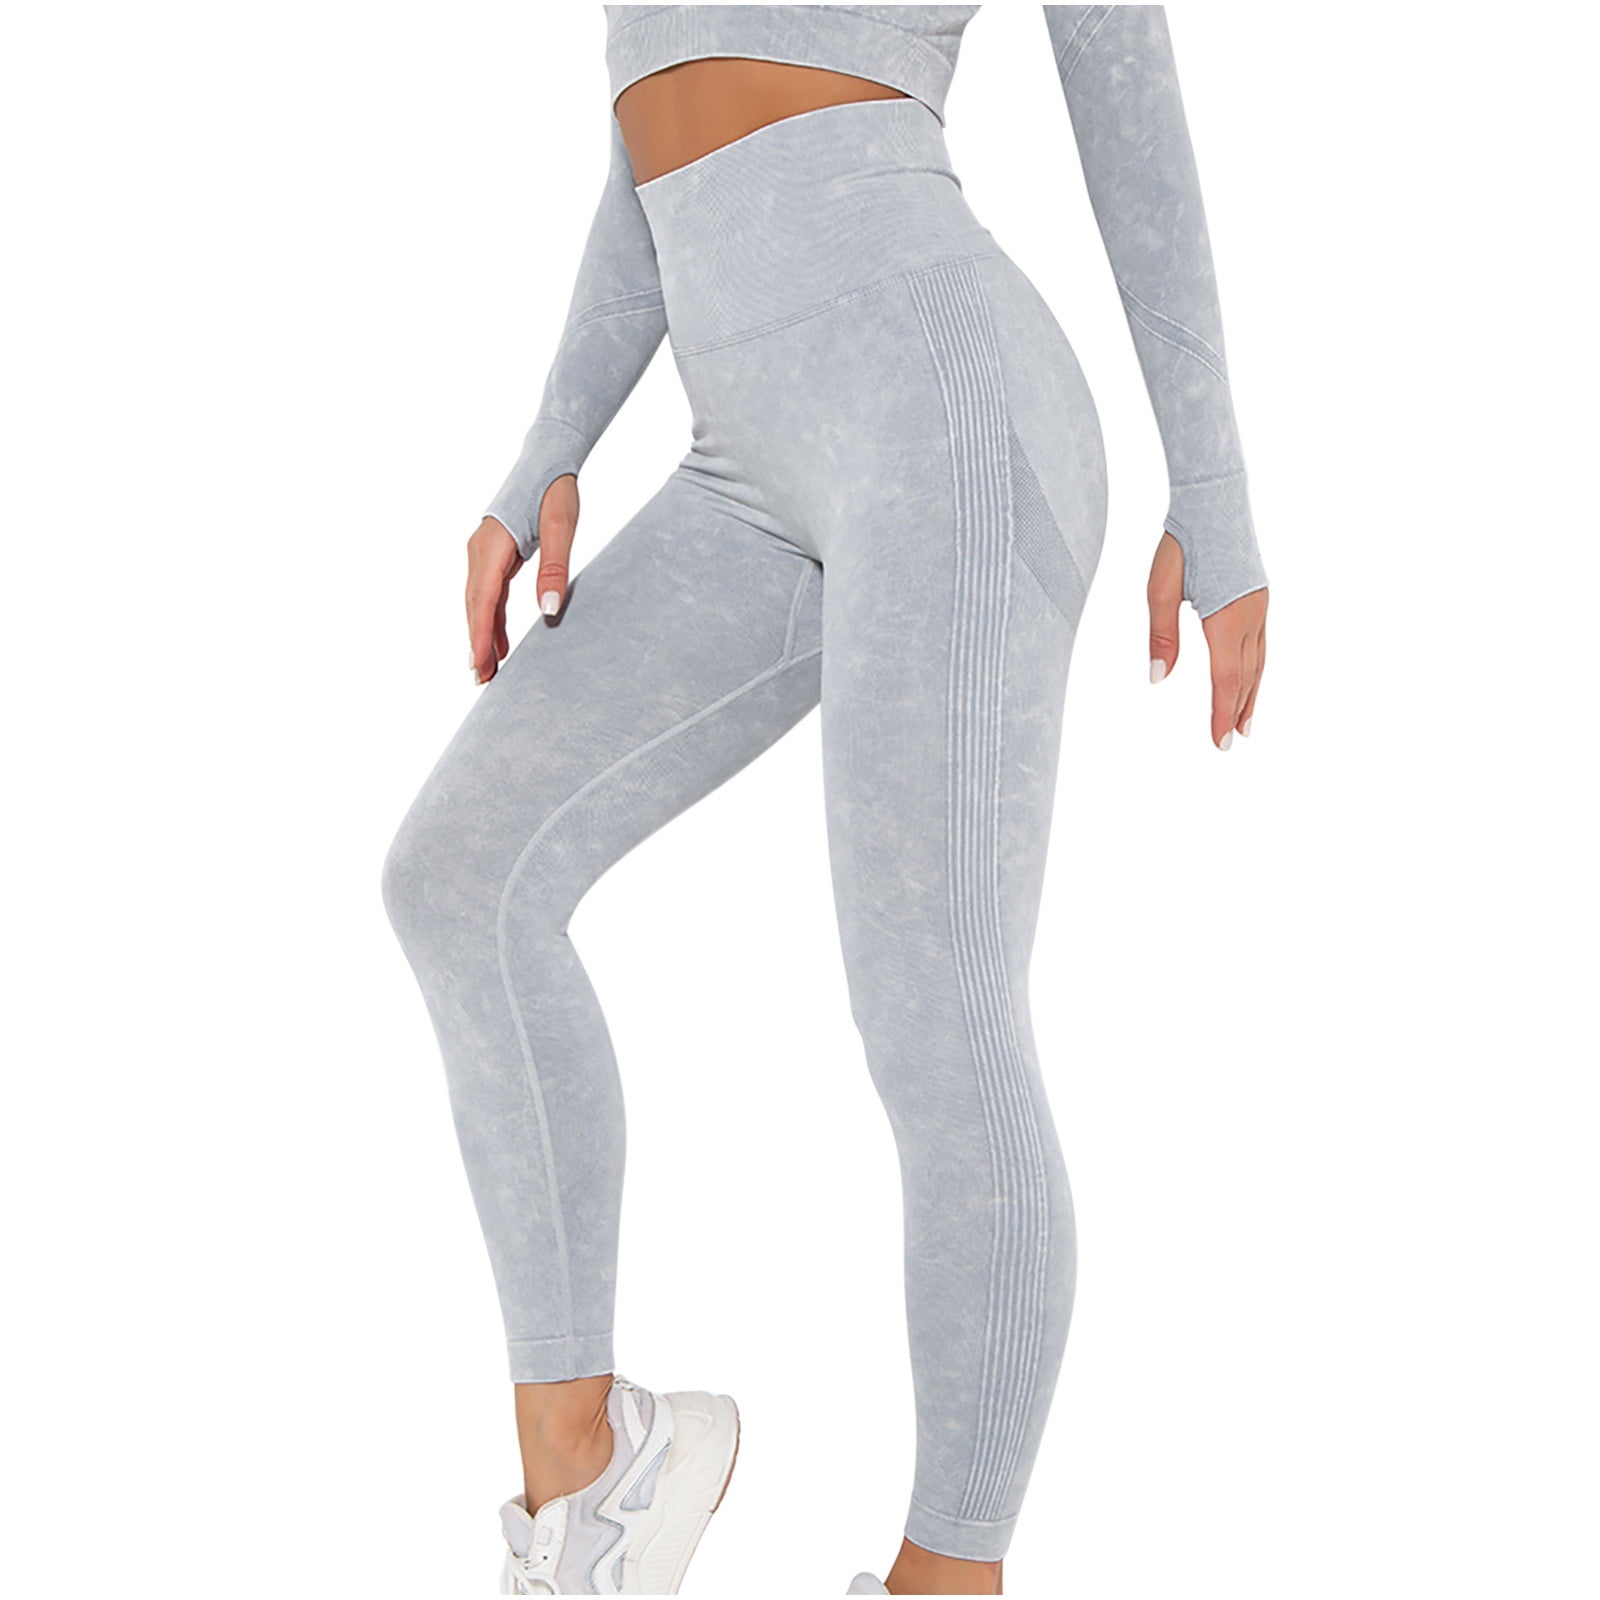 SELONE Gym Leggings for Women Workout Butt Lifting Gym Jumpsuits Seamless  Knit Sports Yogalicious Utility Dressy Everyday Soft Capri Jeggings for  Women Athletic Leggings for Women 10-Gray M 